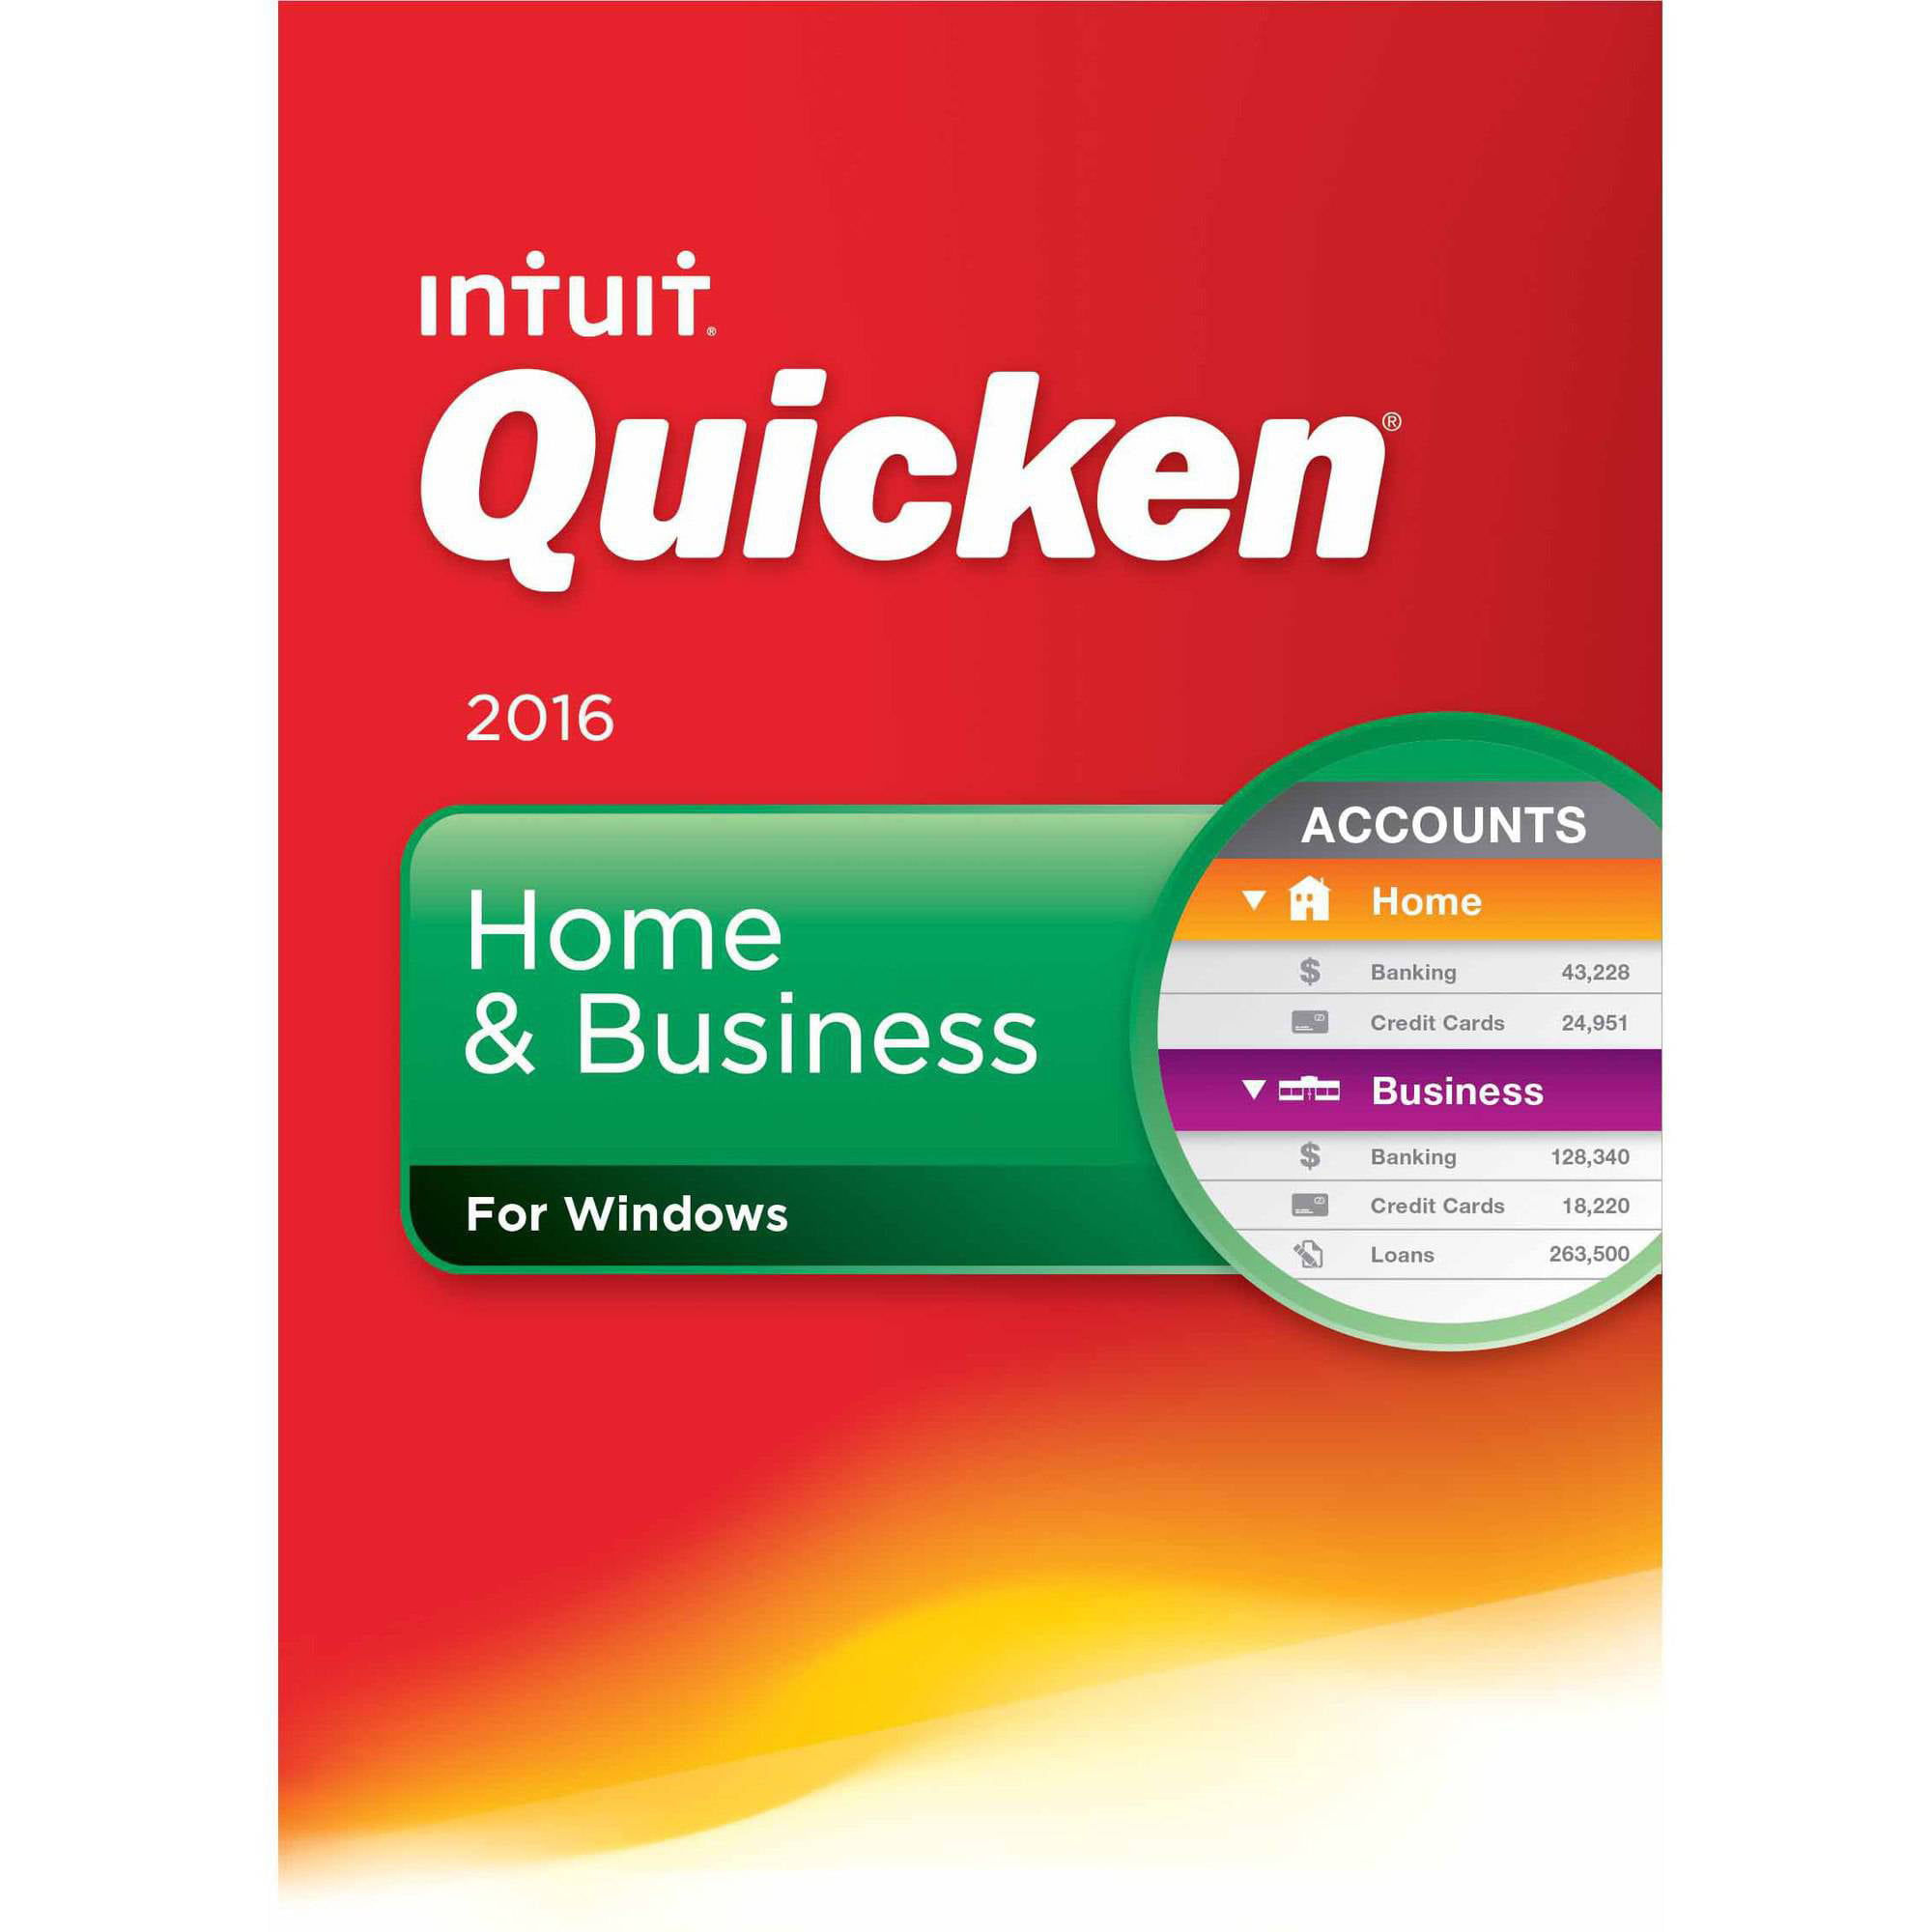 quicken home and business